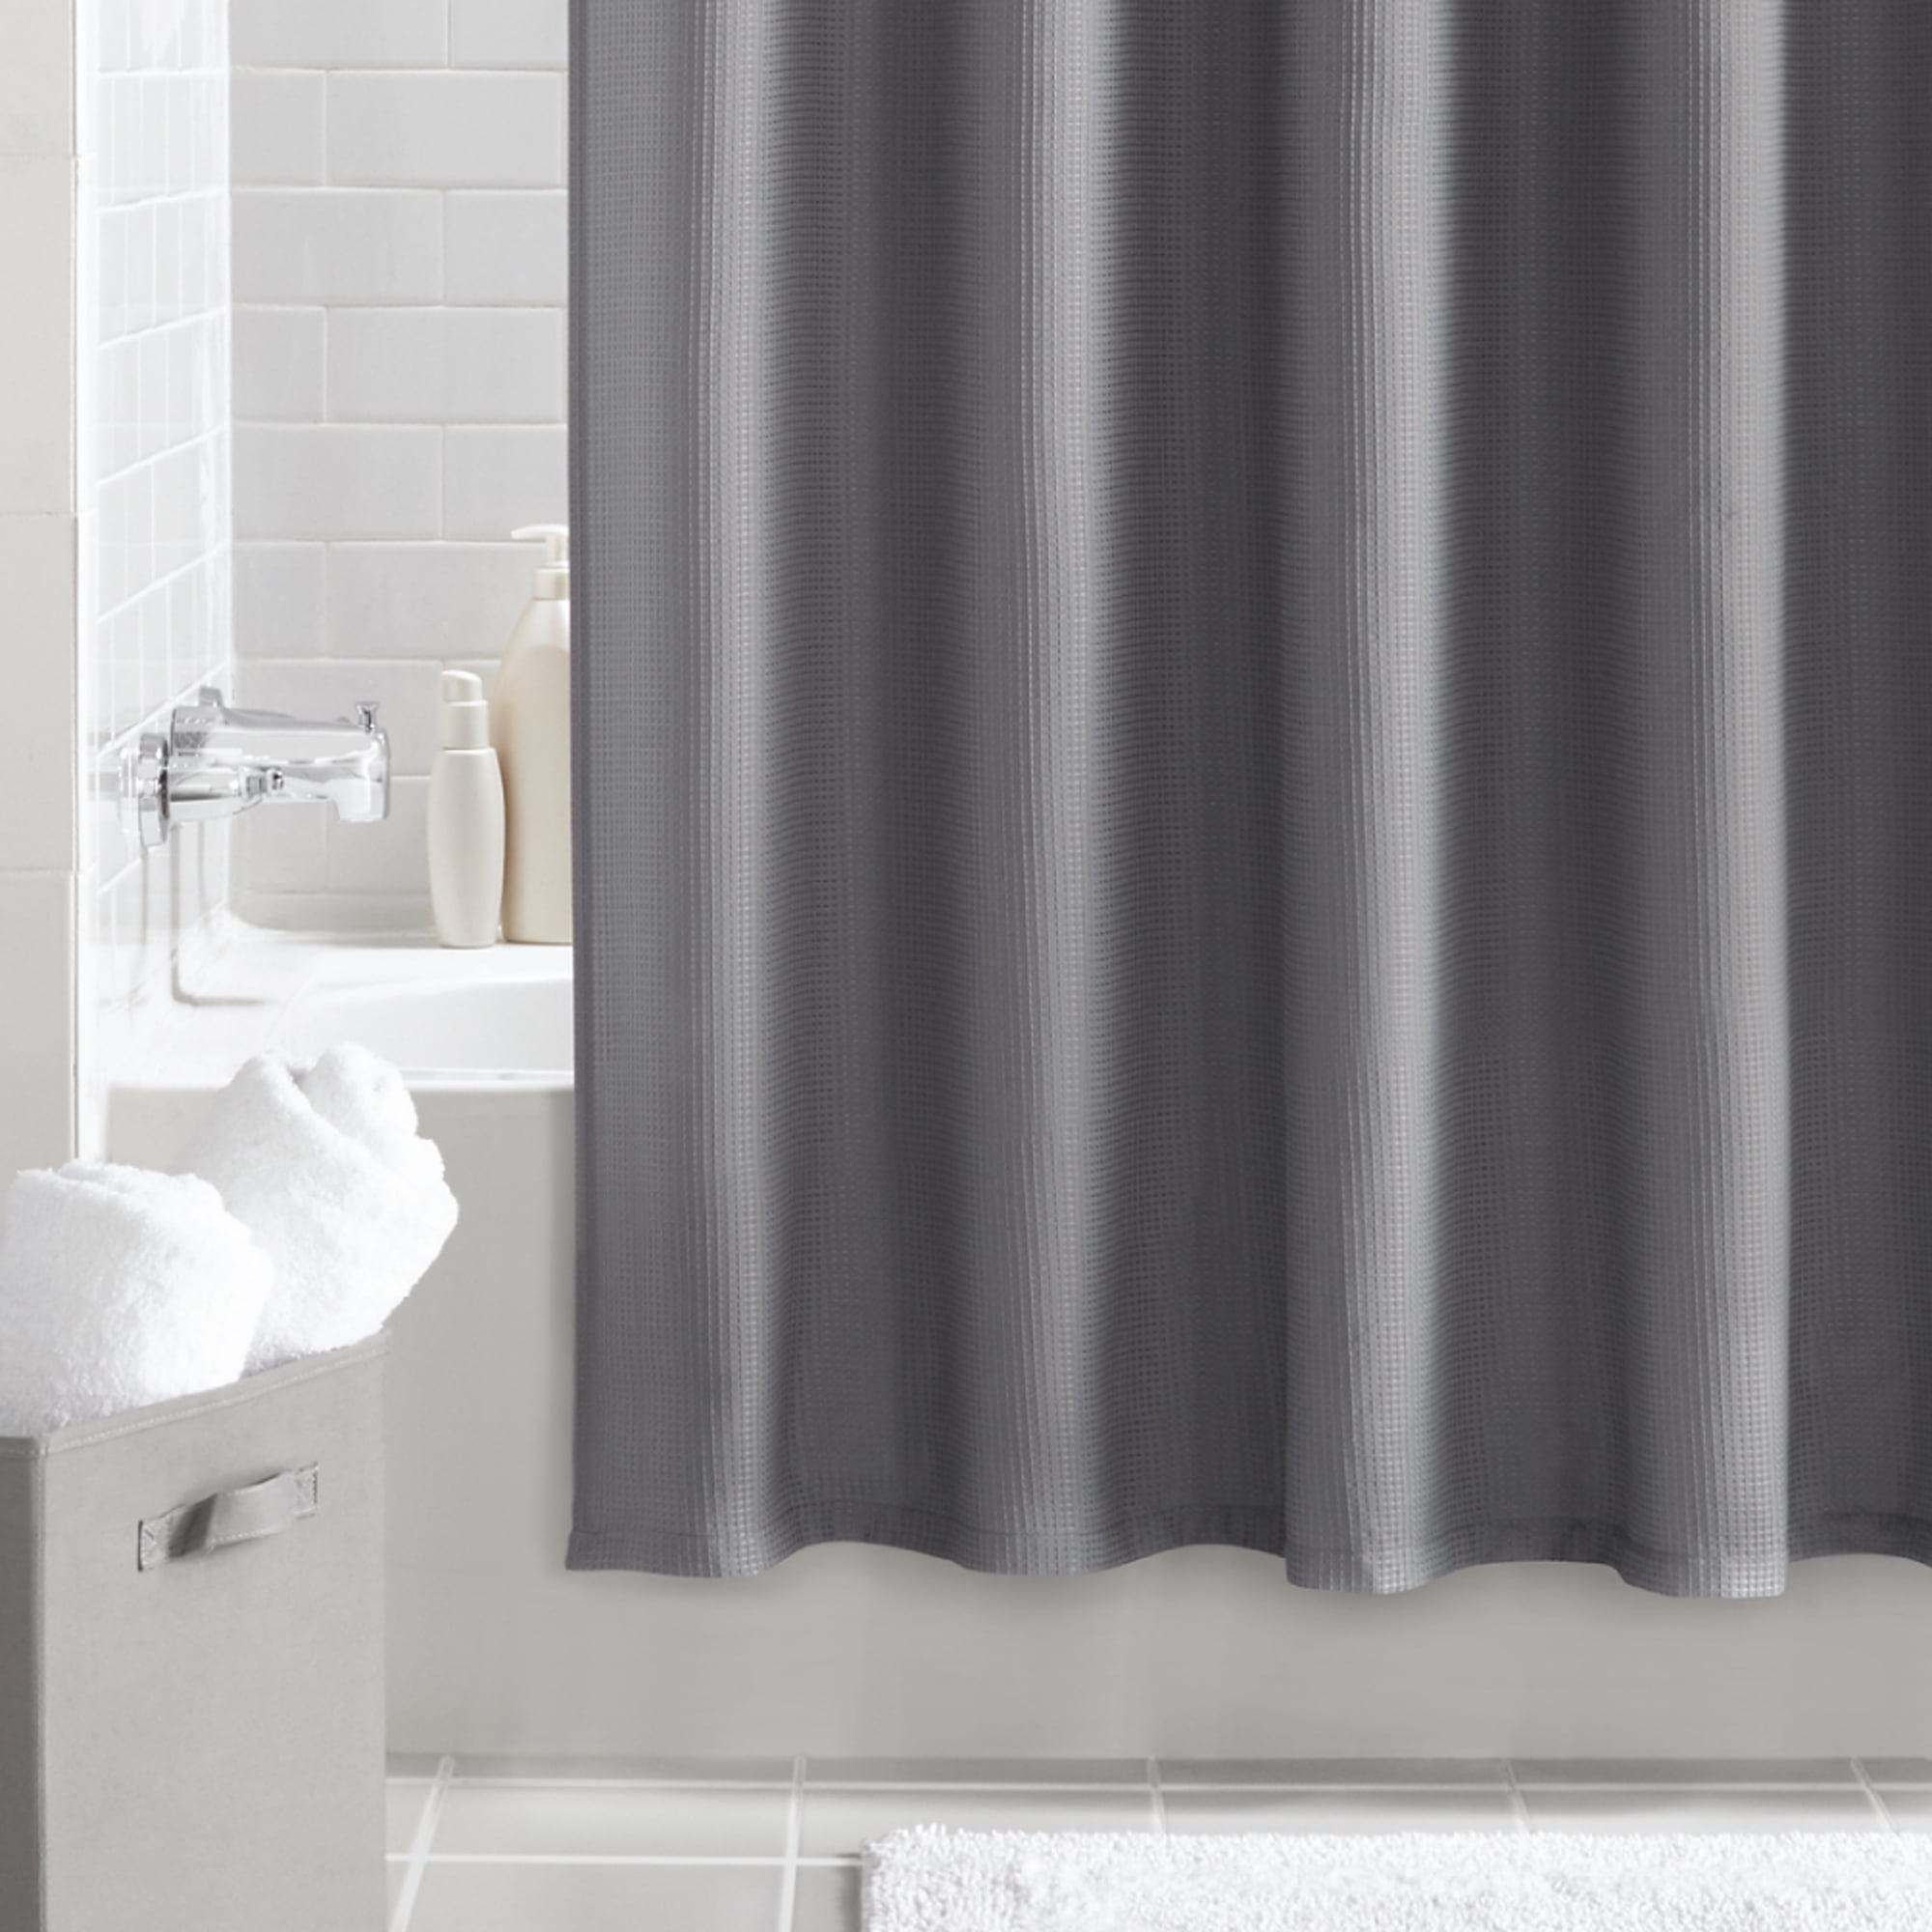 Mainstays Waffle Weave Fabric Shower, Grey Textured Shower Curtain